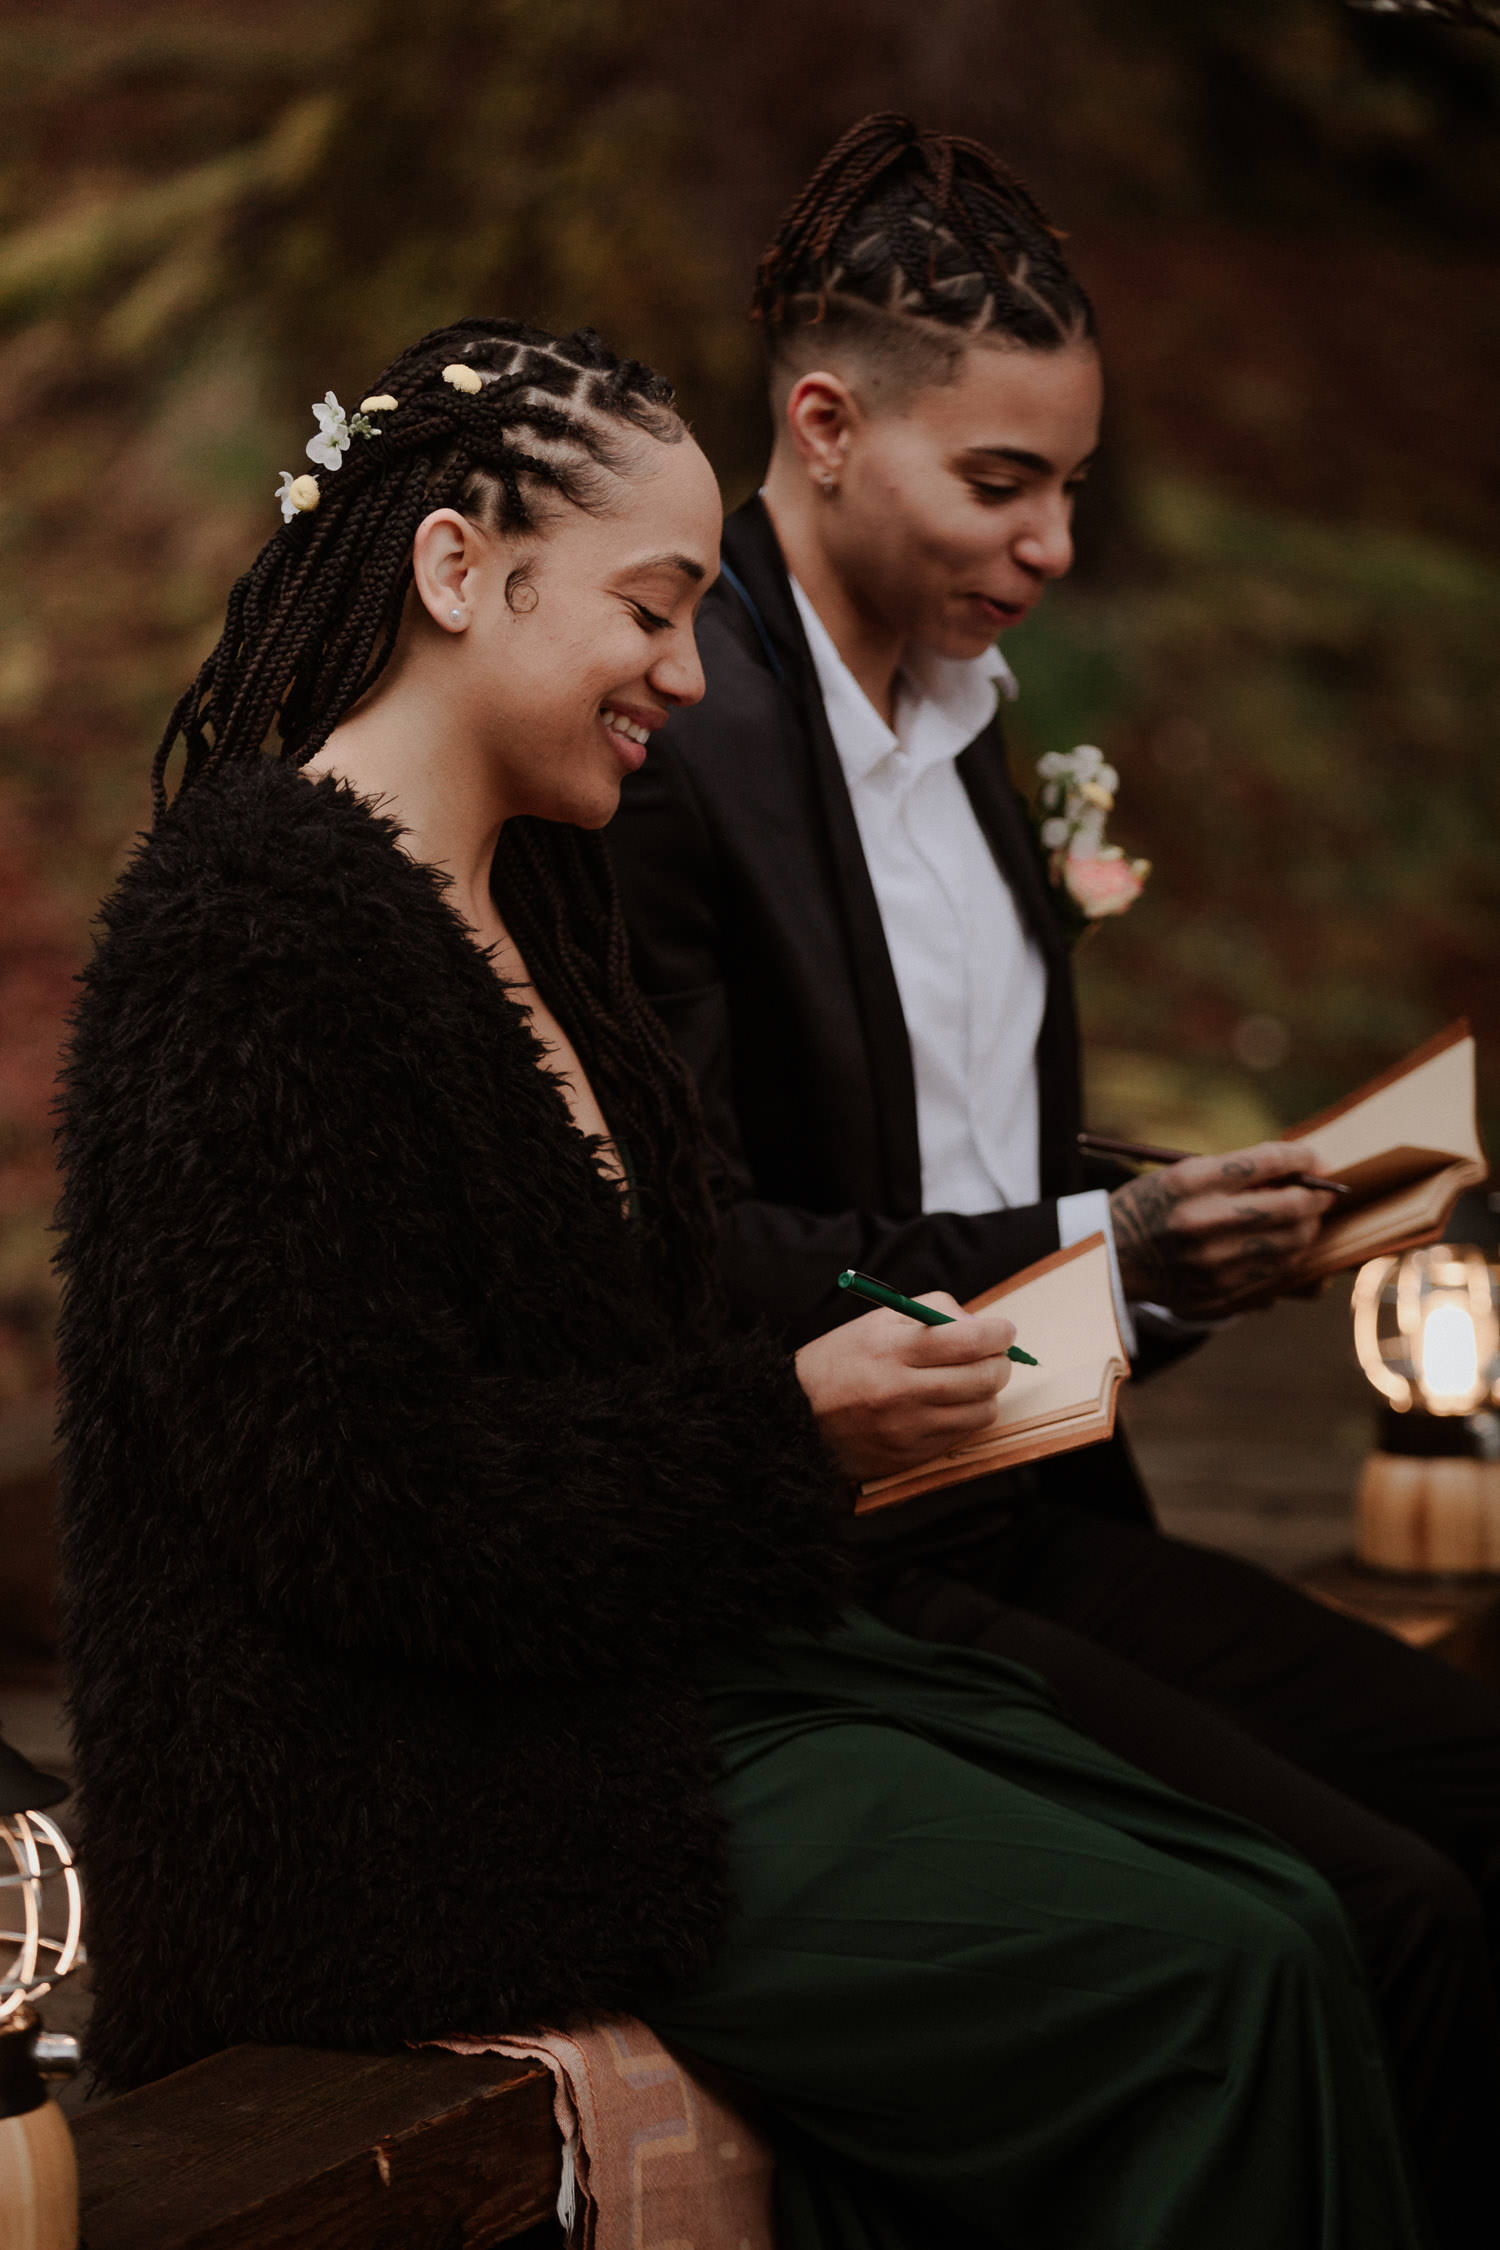 Couple writes their vows together by lamplight before their elopement ceremony